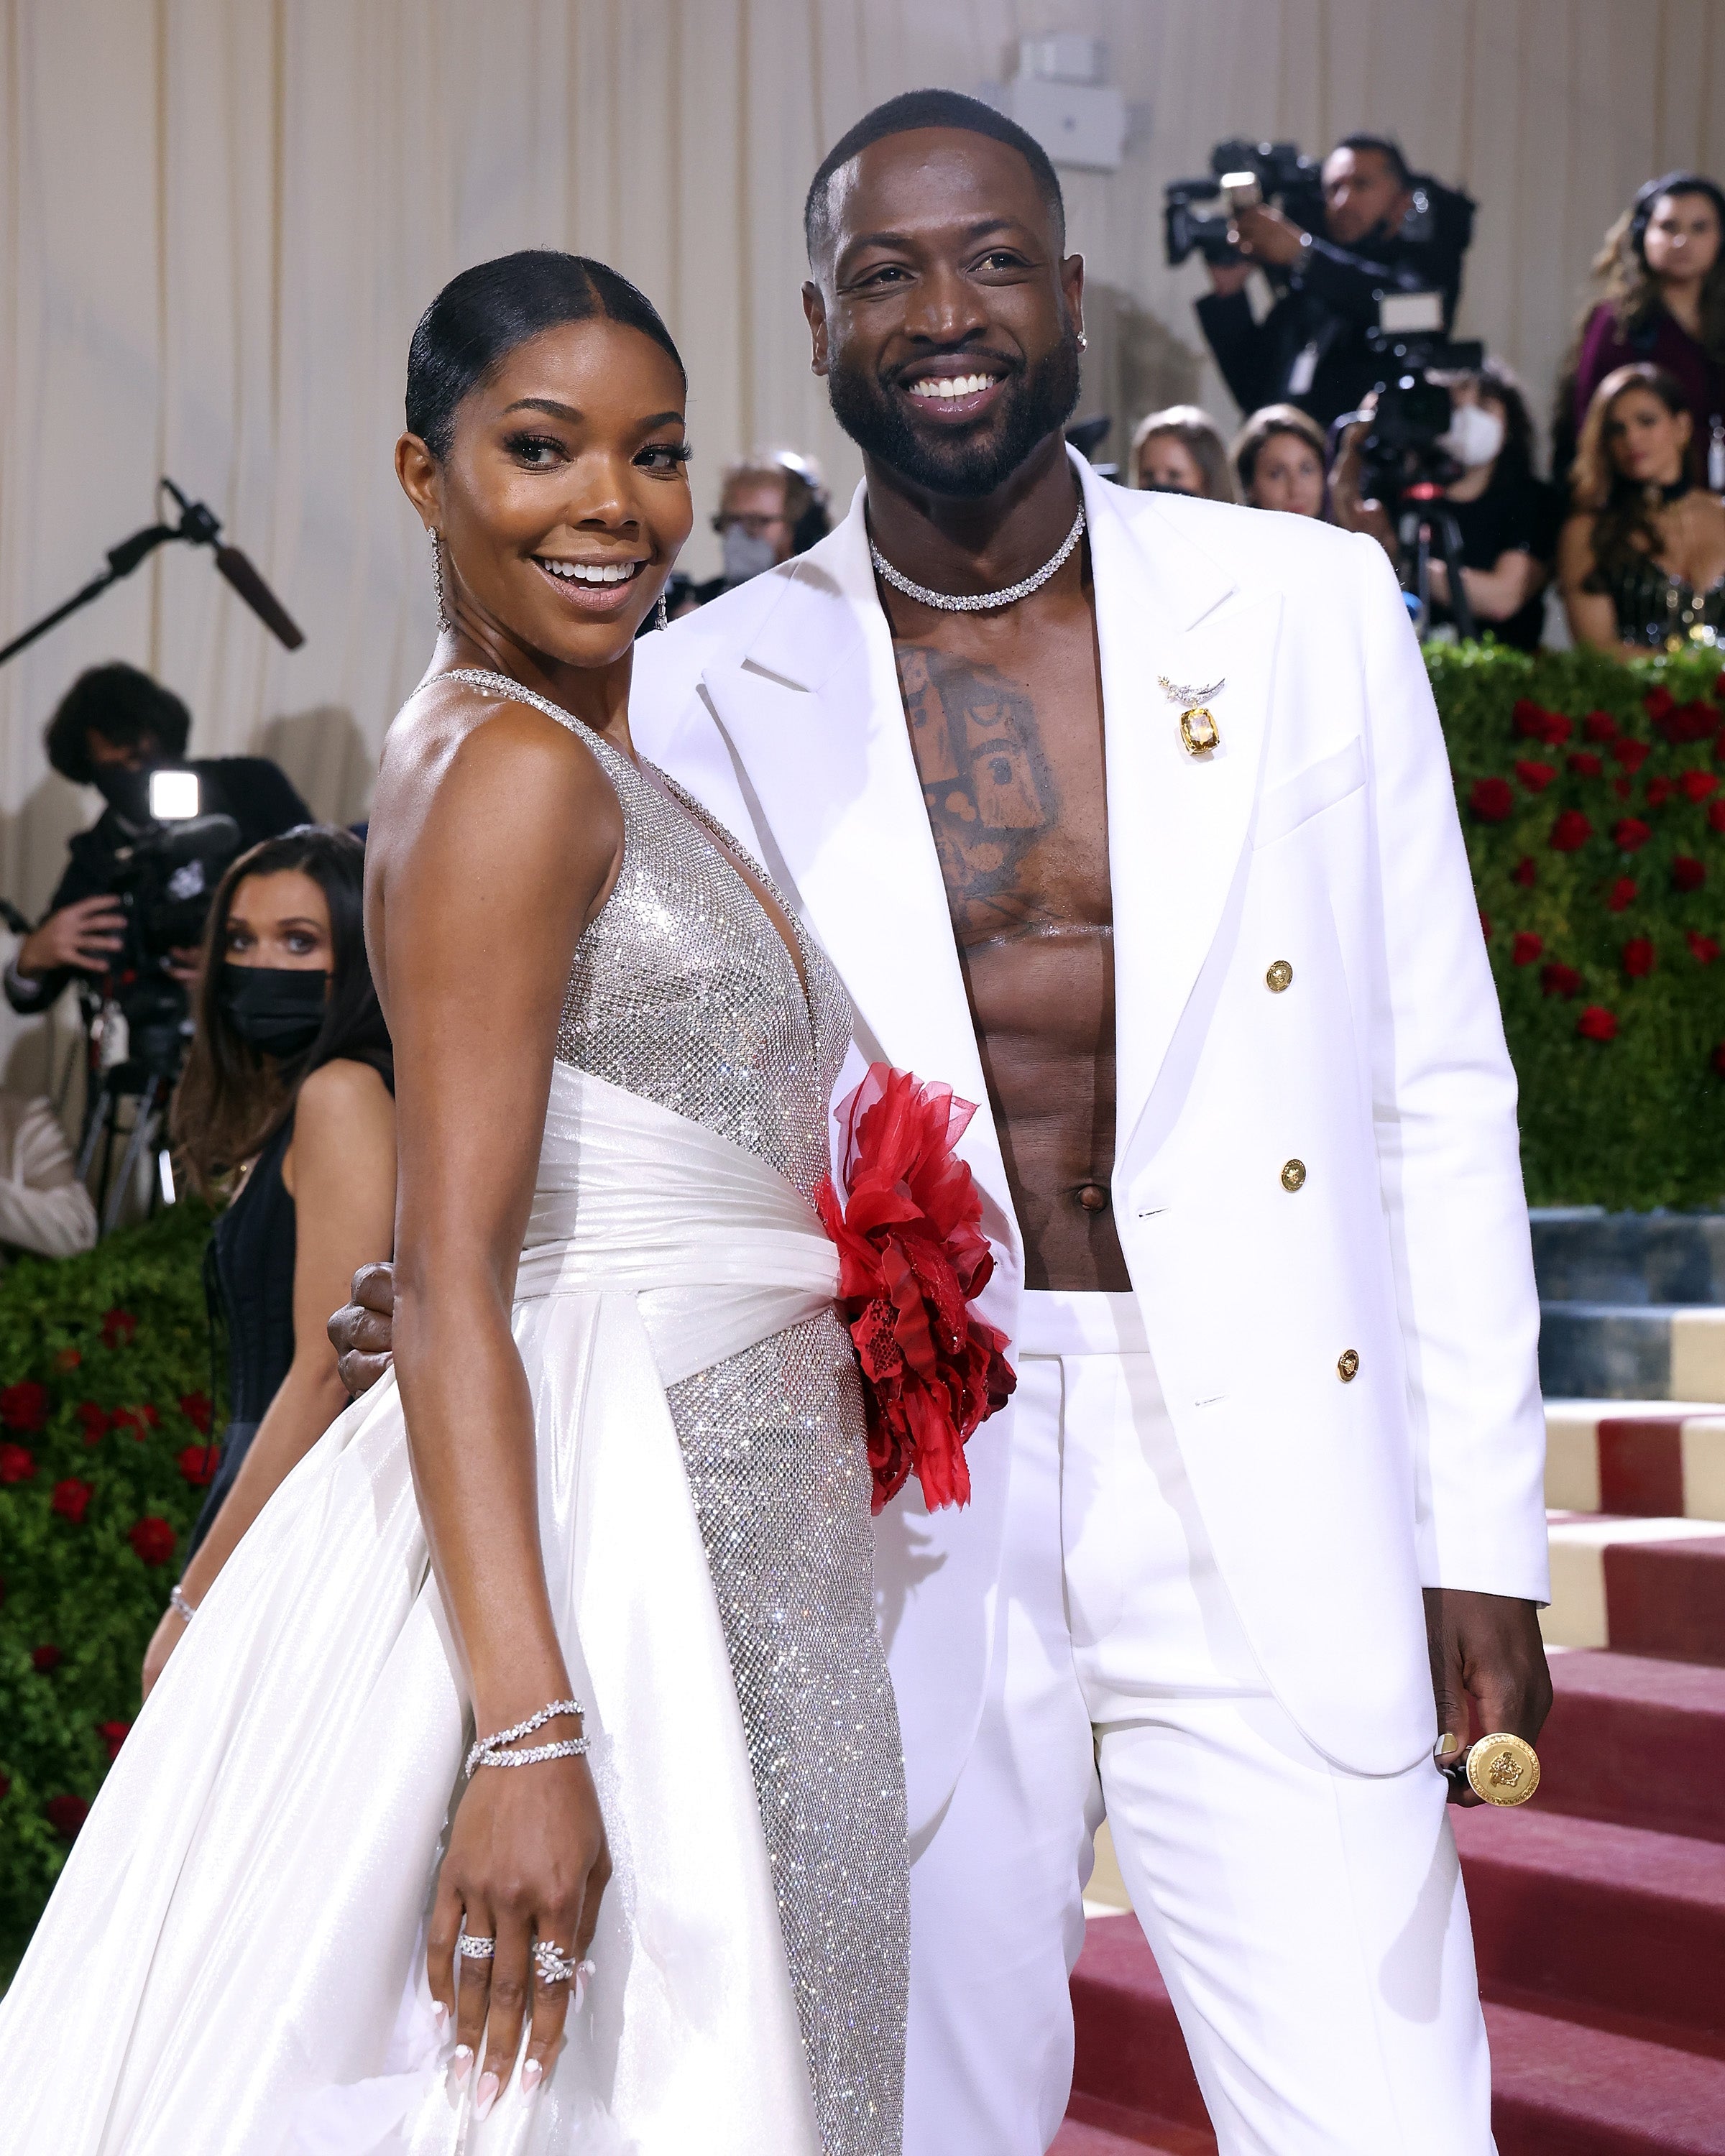 Gabrielle Union Engaged To Dwayne Wade